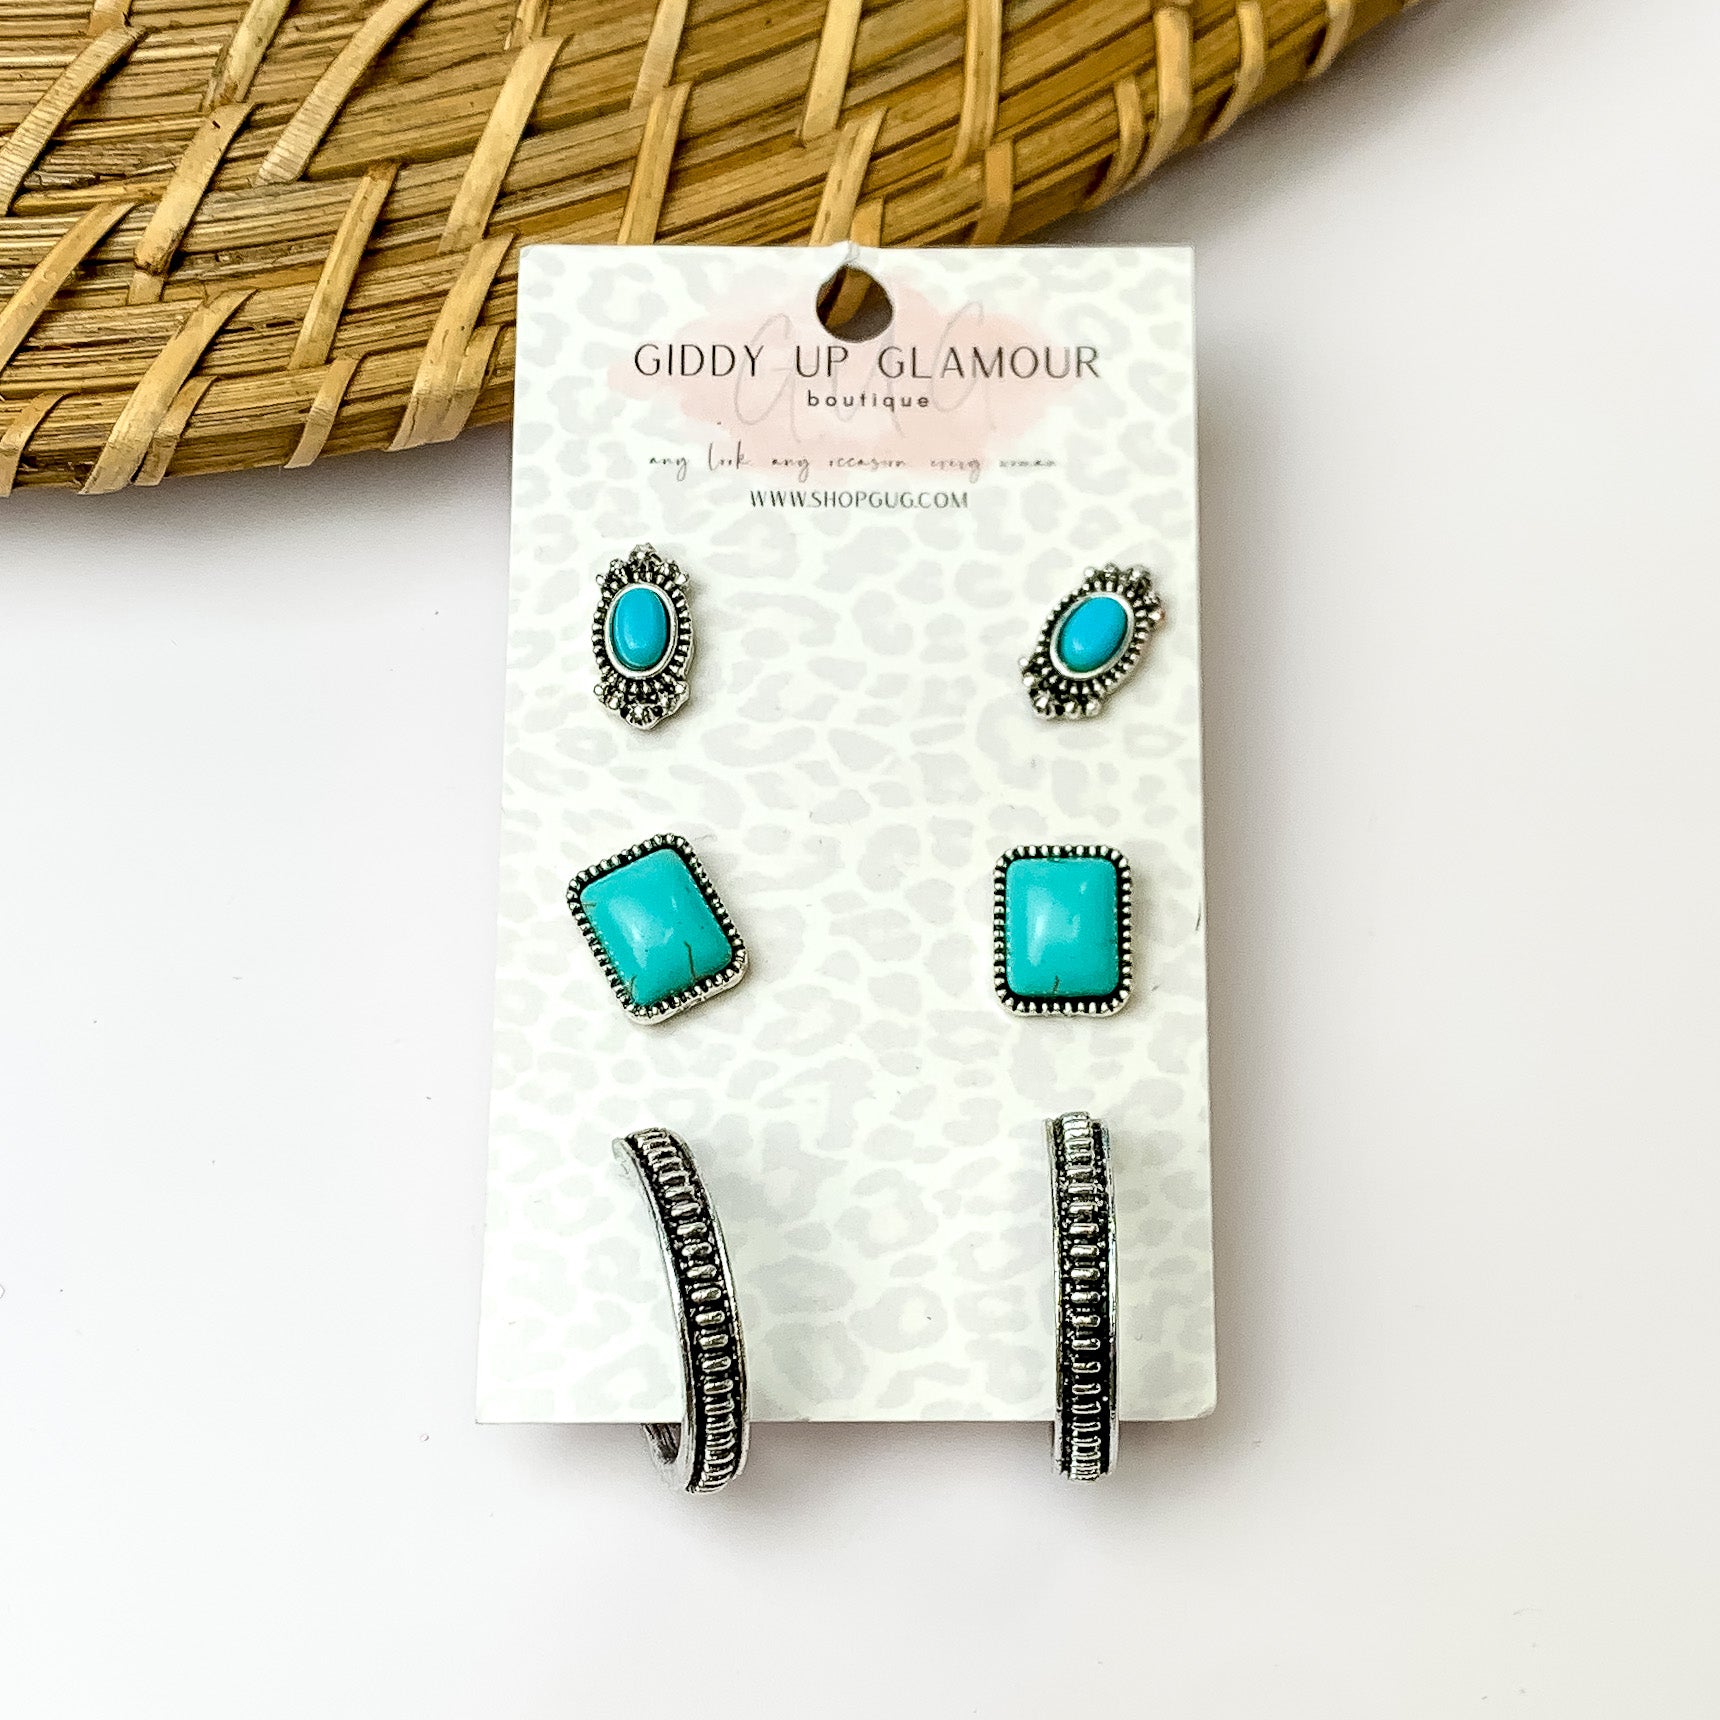 Pack of three turquoise and silver designed stud earrings. On a white background with wood like detail in the top left corner.